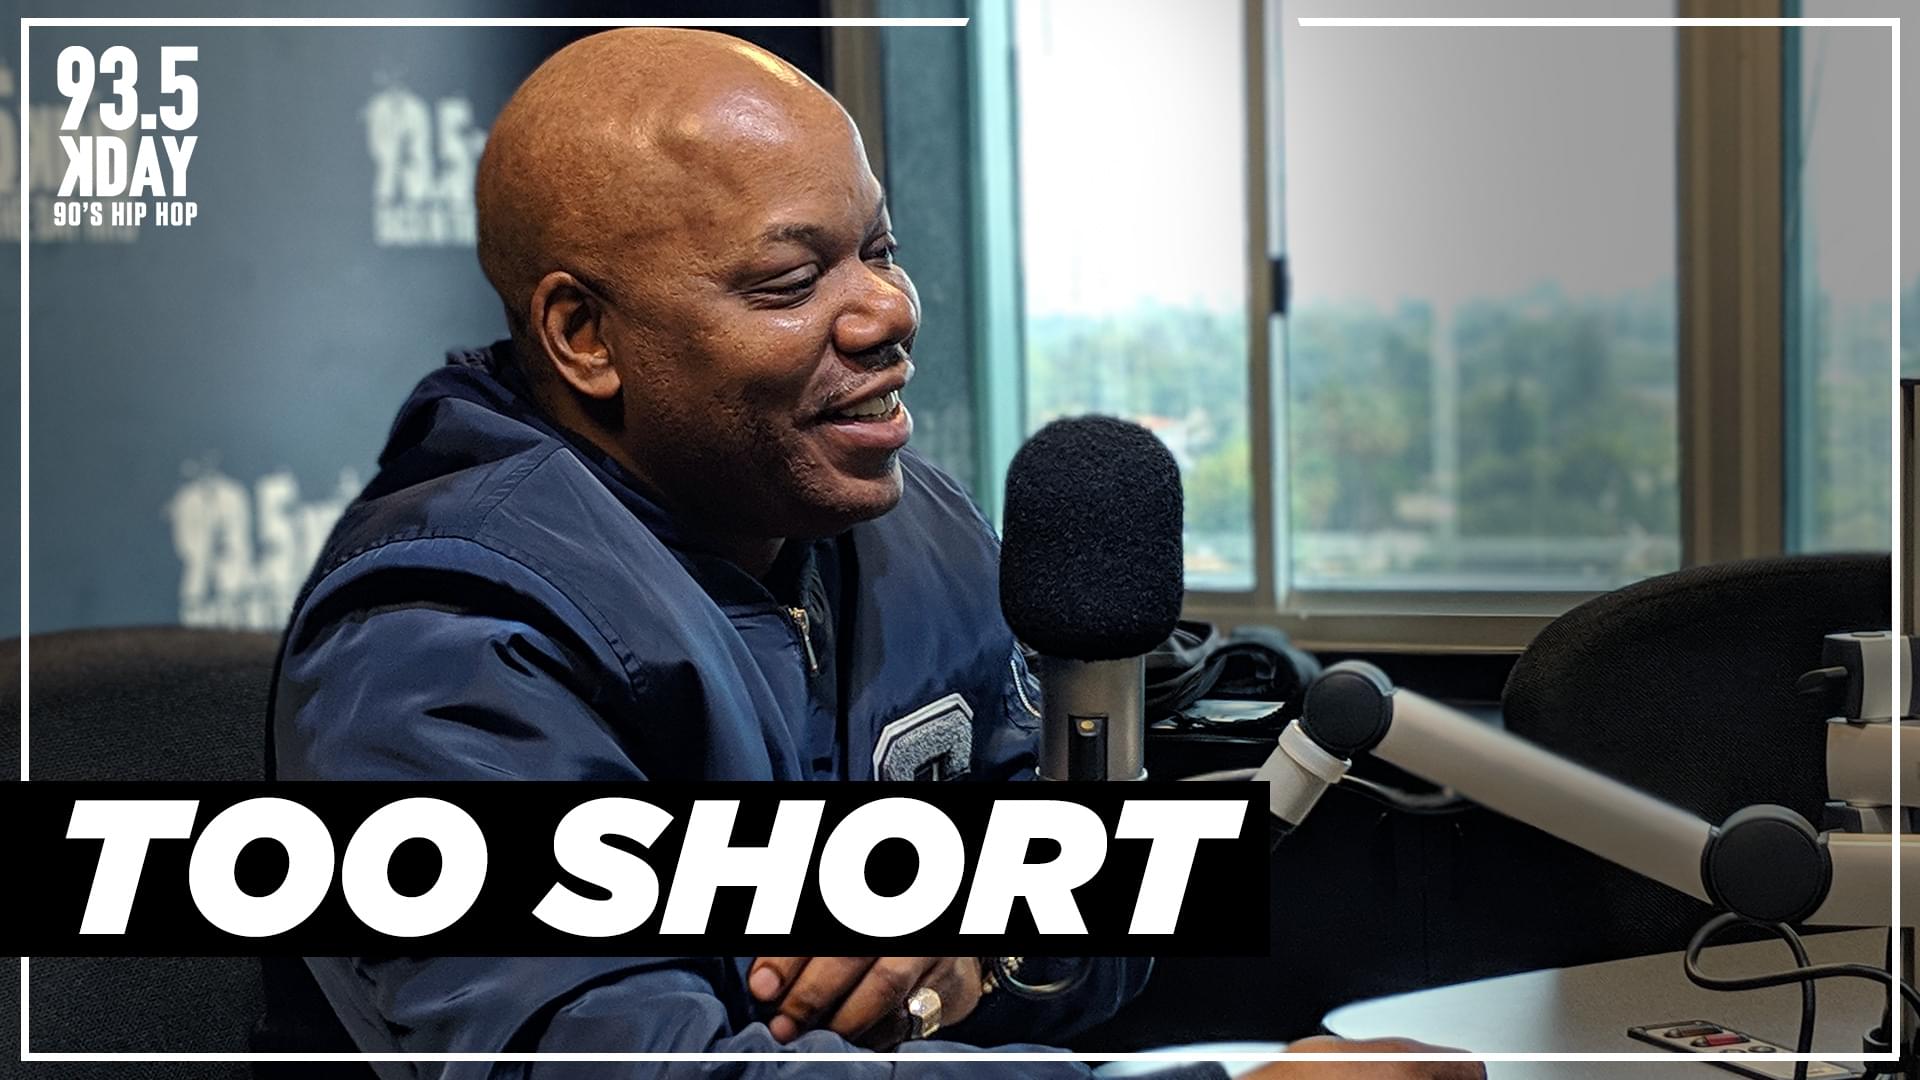 Too $hort Talks New Album ‘The Pimp Tape’, The Moment He Started Rapping, & Lil Jon Relationship